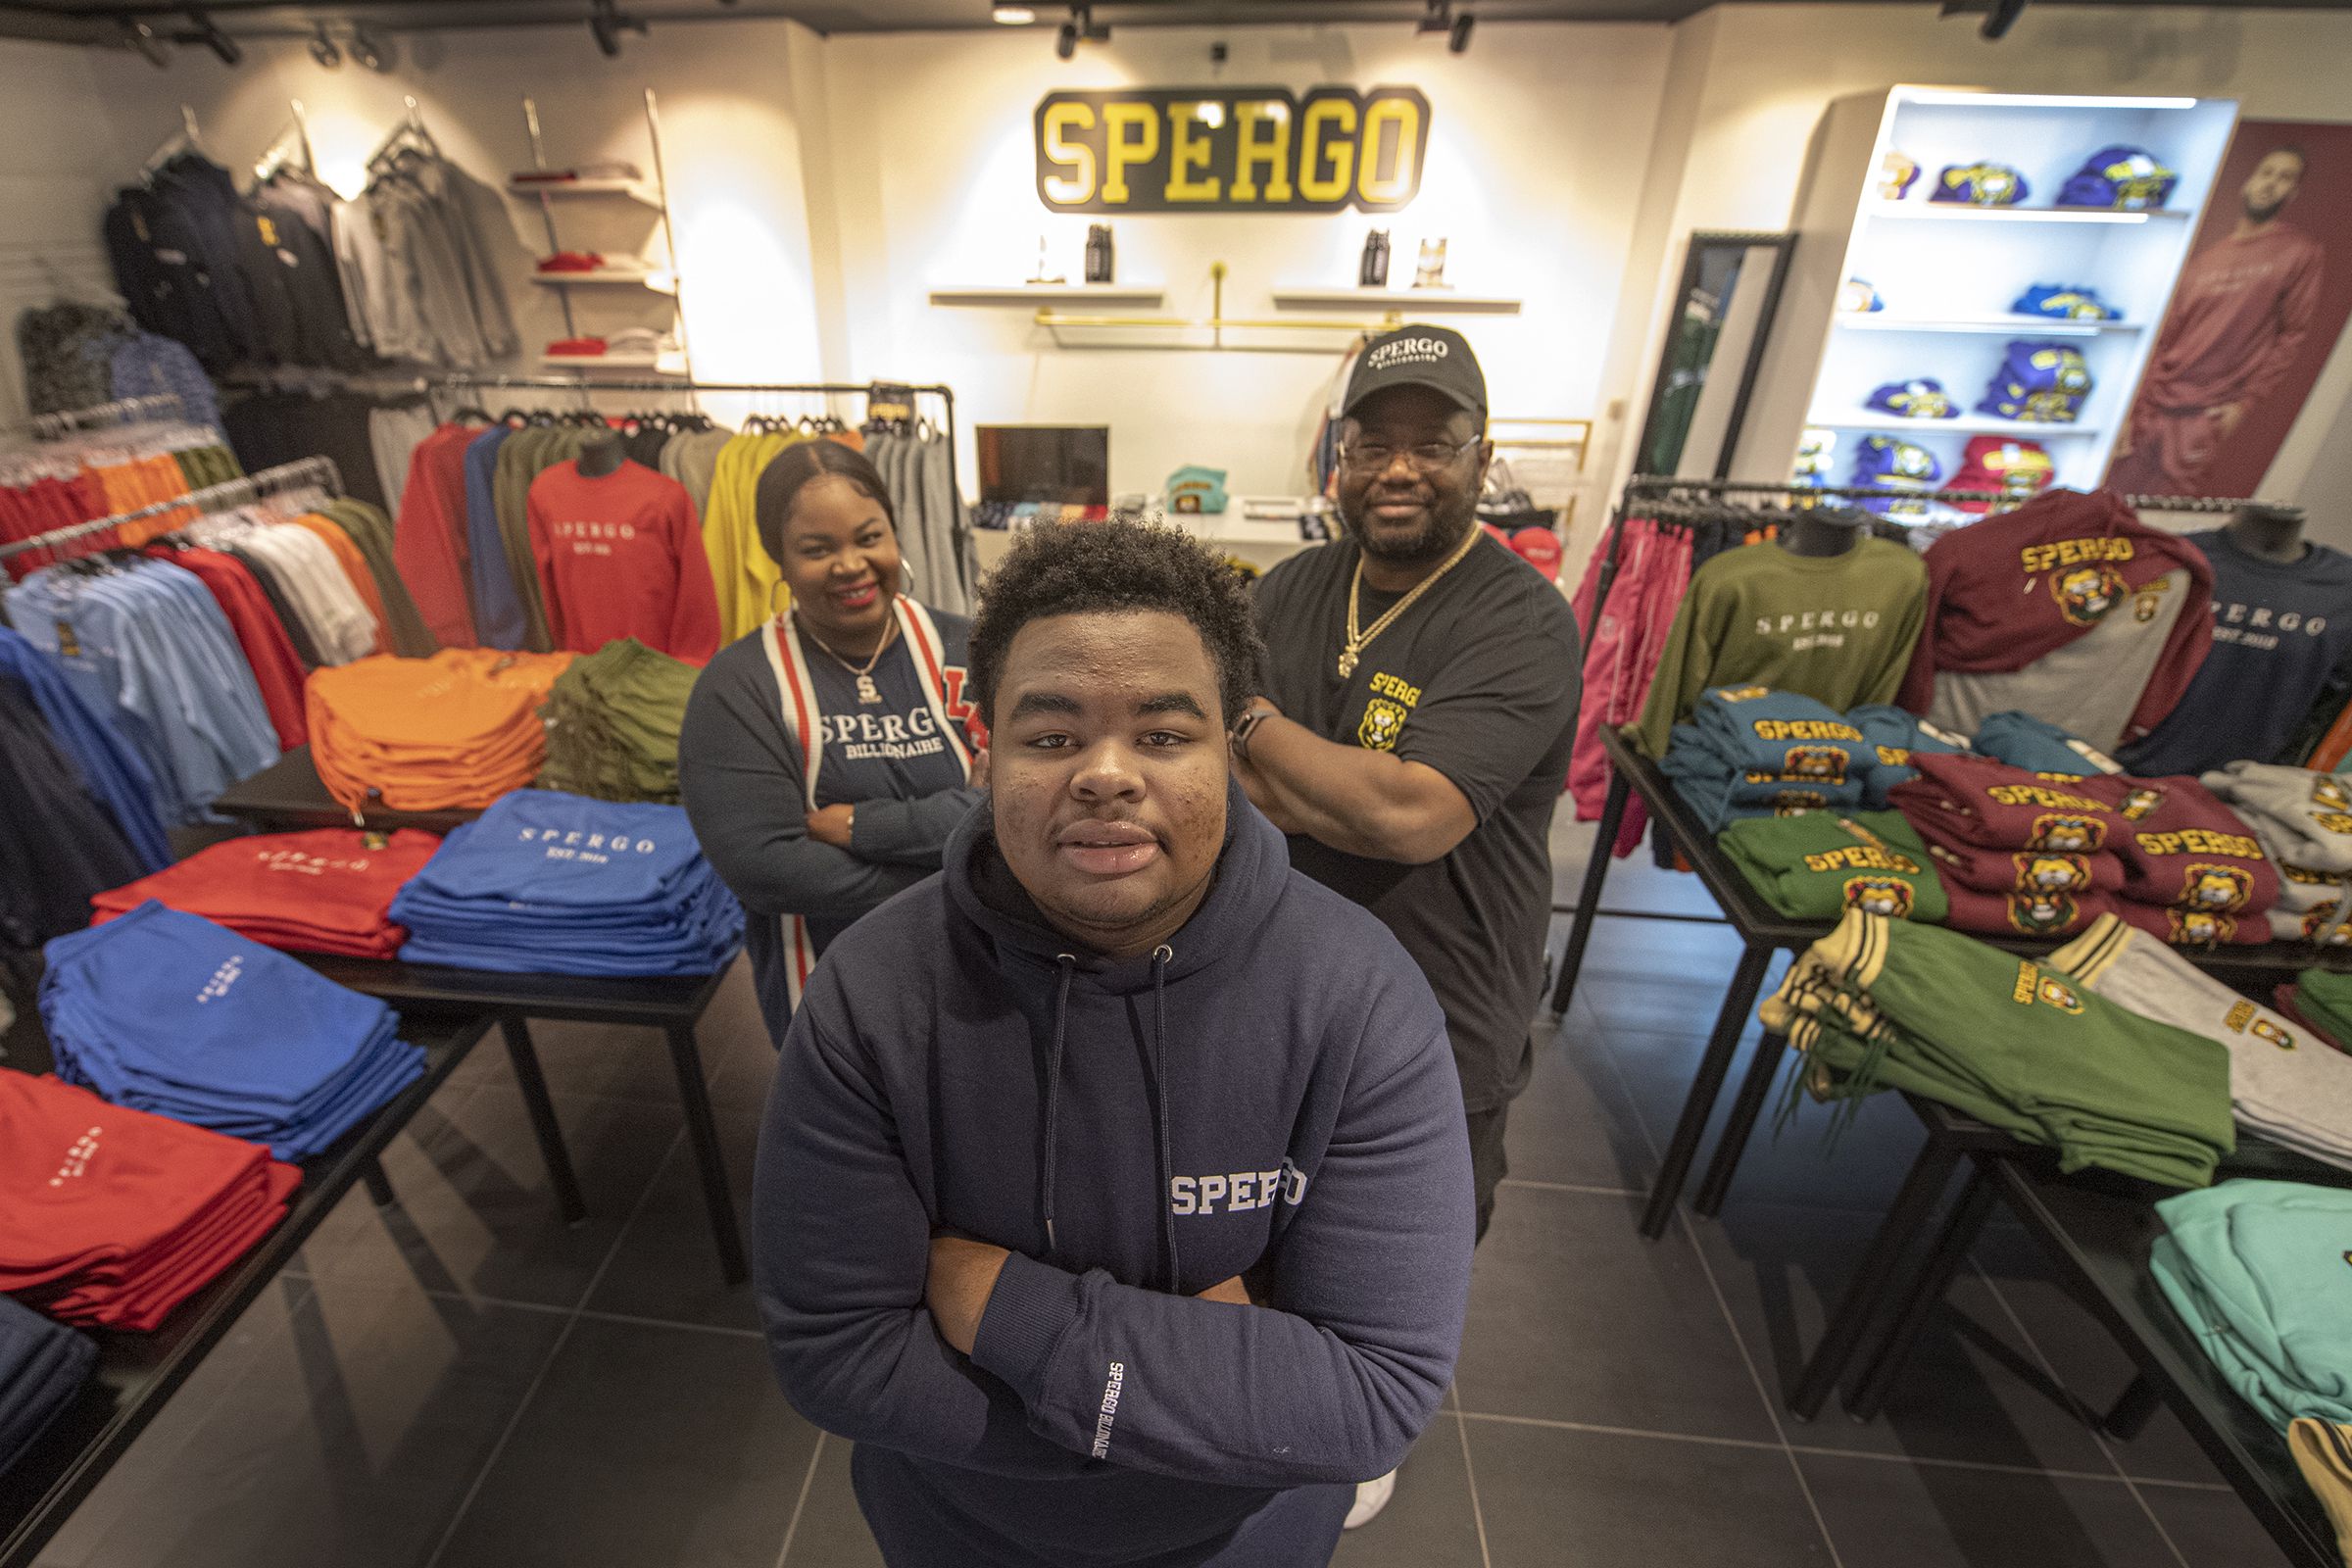 Spergo teen CEO Trey Brown plans expansion after $300K investment on Shark  Tank